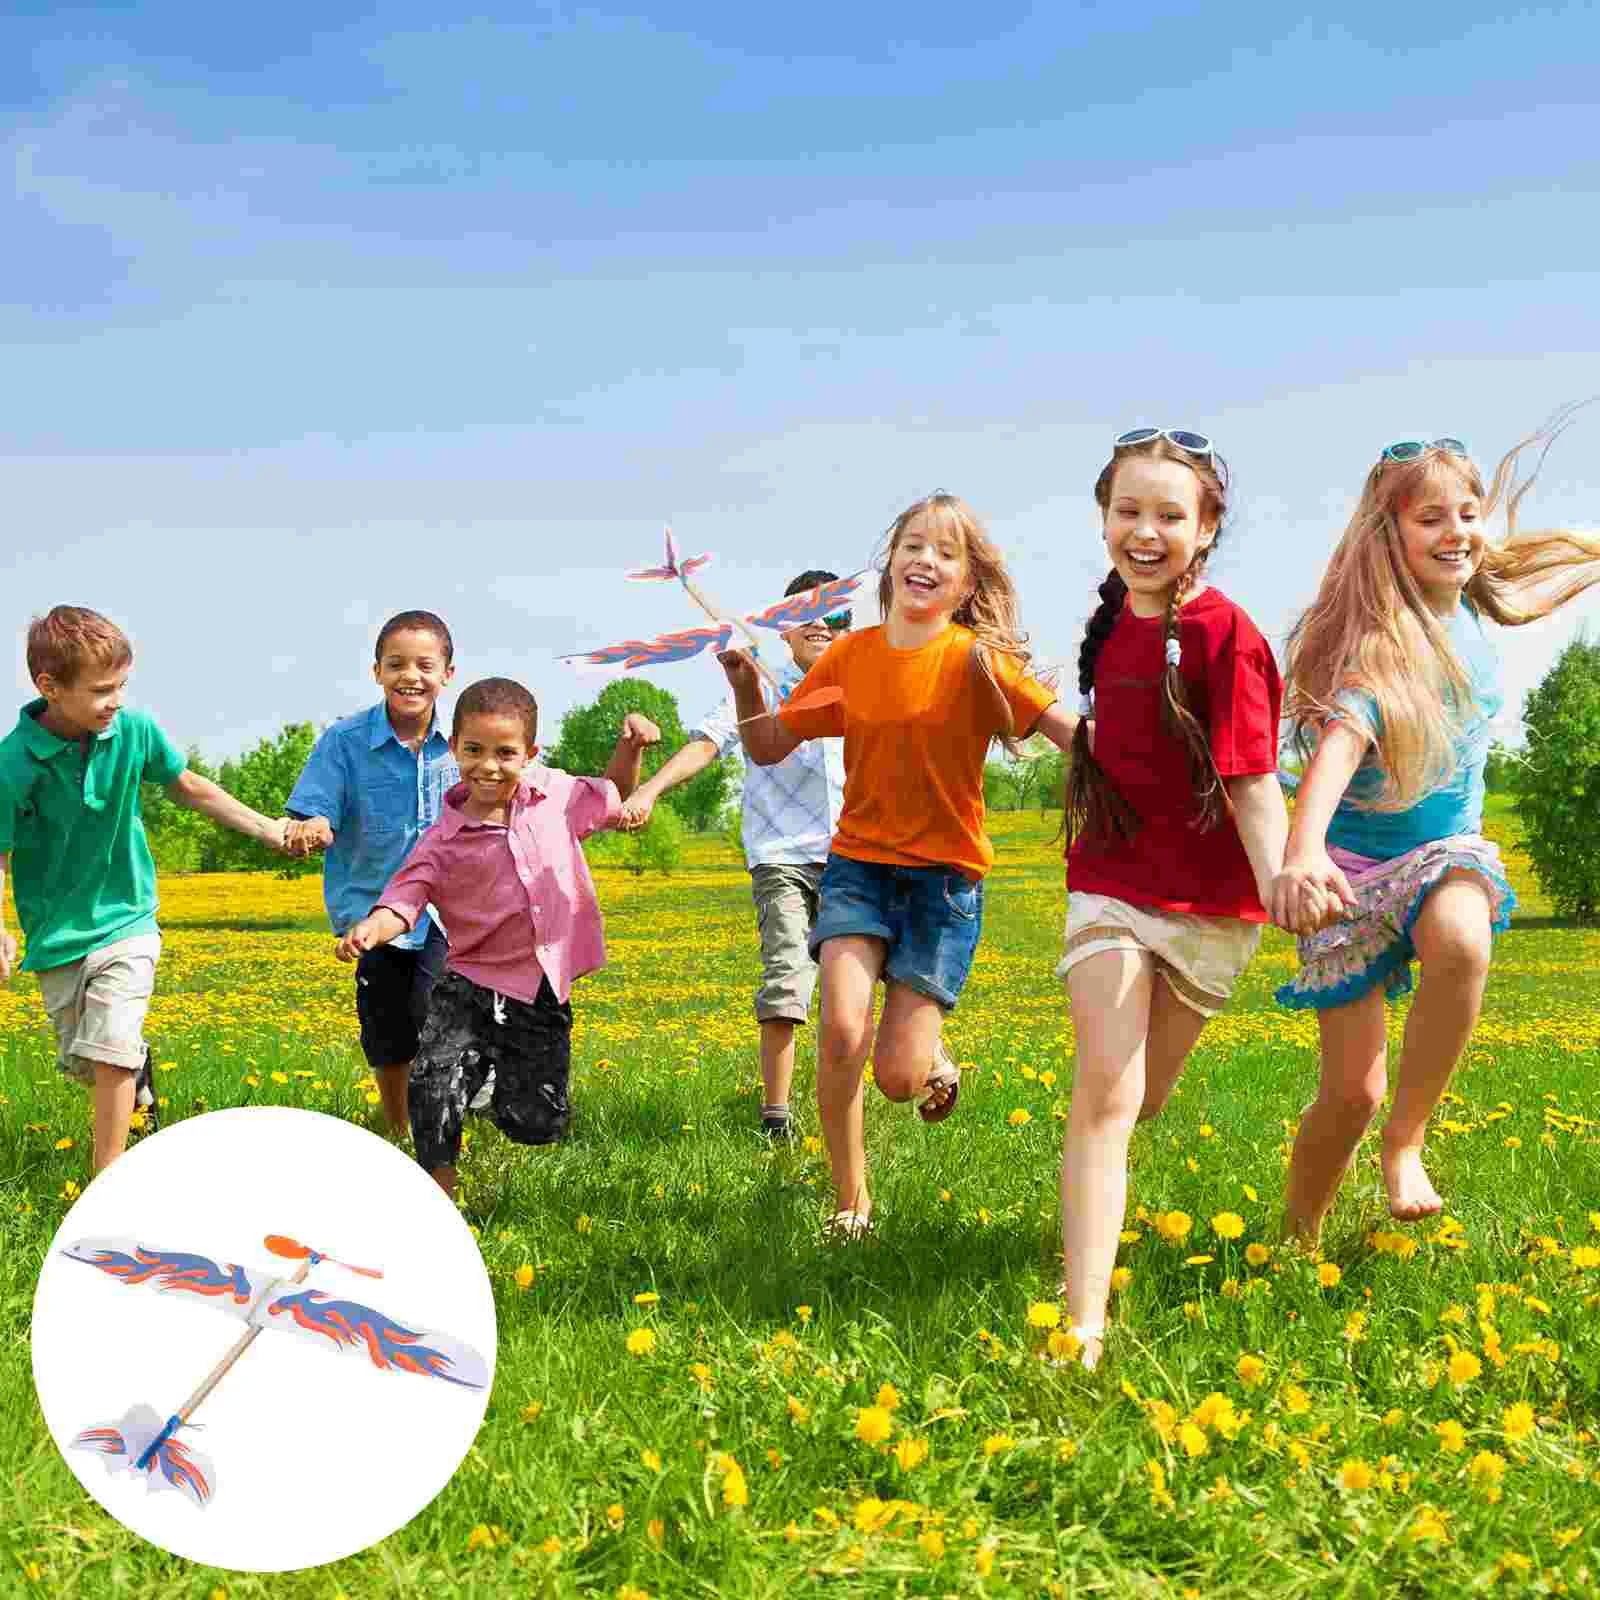 

3pcs Rubber Band Powered Glider Airplane Flying Glider Planes Toys Windup Flying Copter Toys Handout Glider Model Kids Birthday